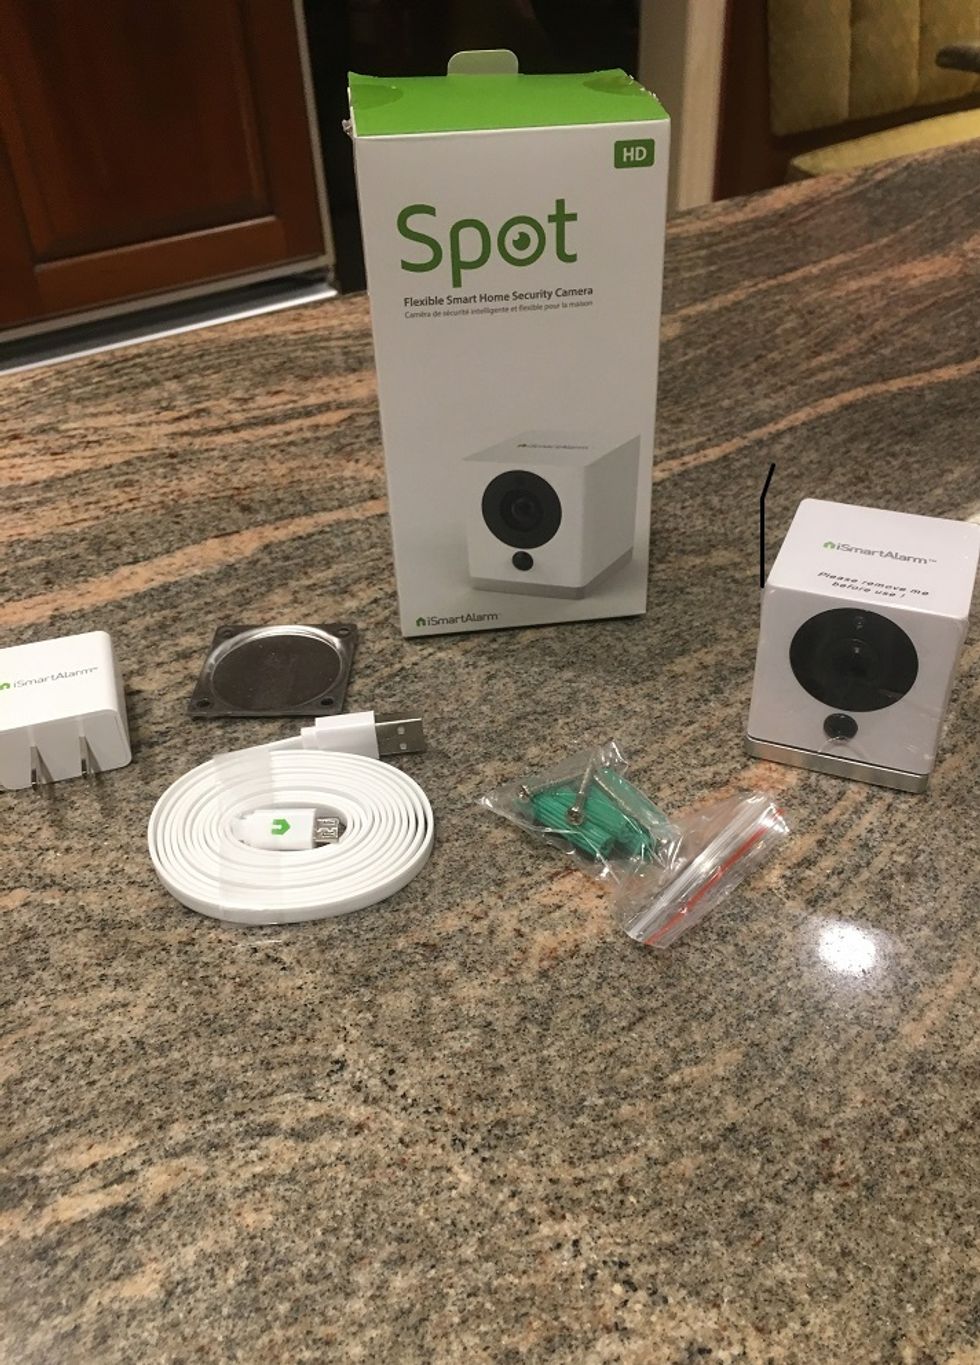 Photo of iSmartAlarm's security camera Spot on a counter.